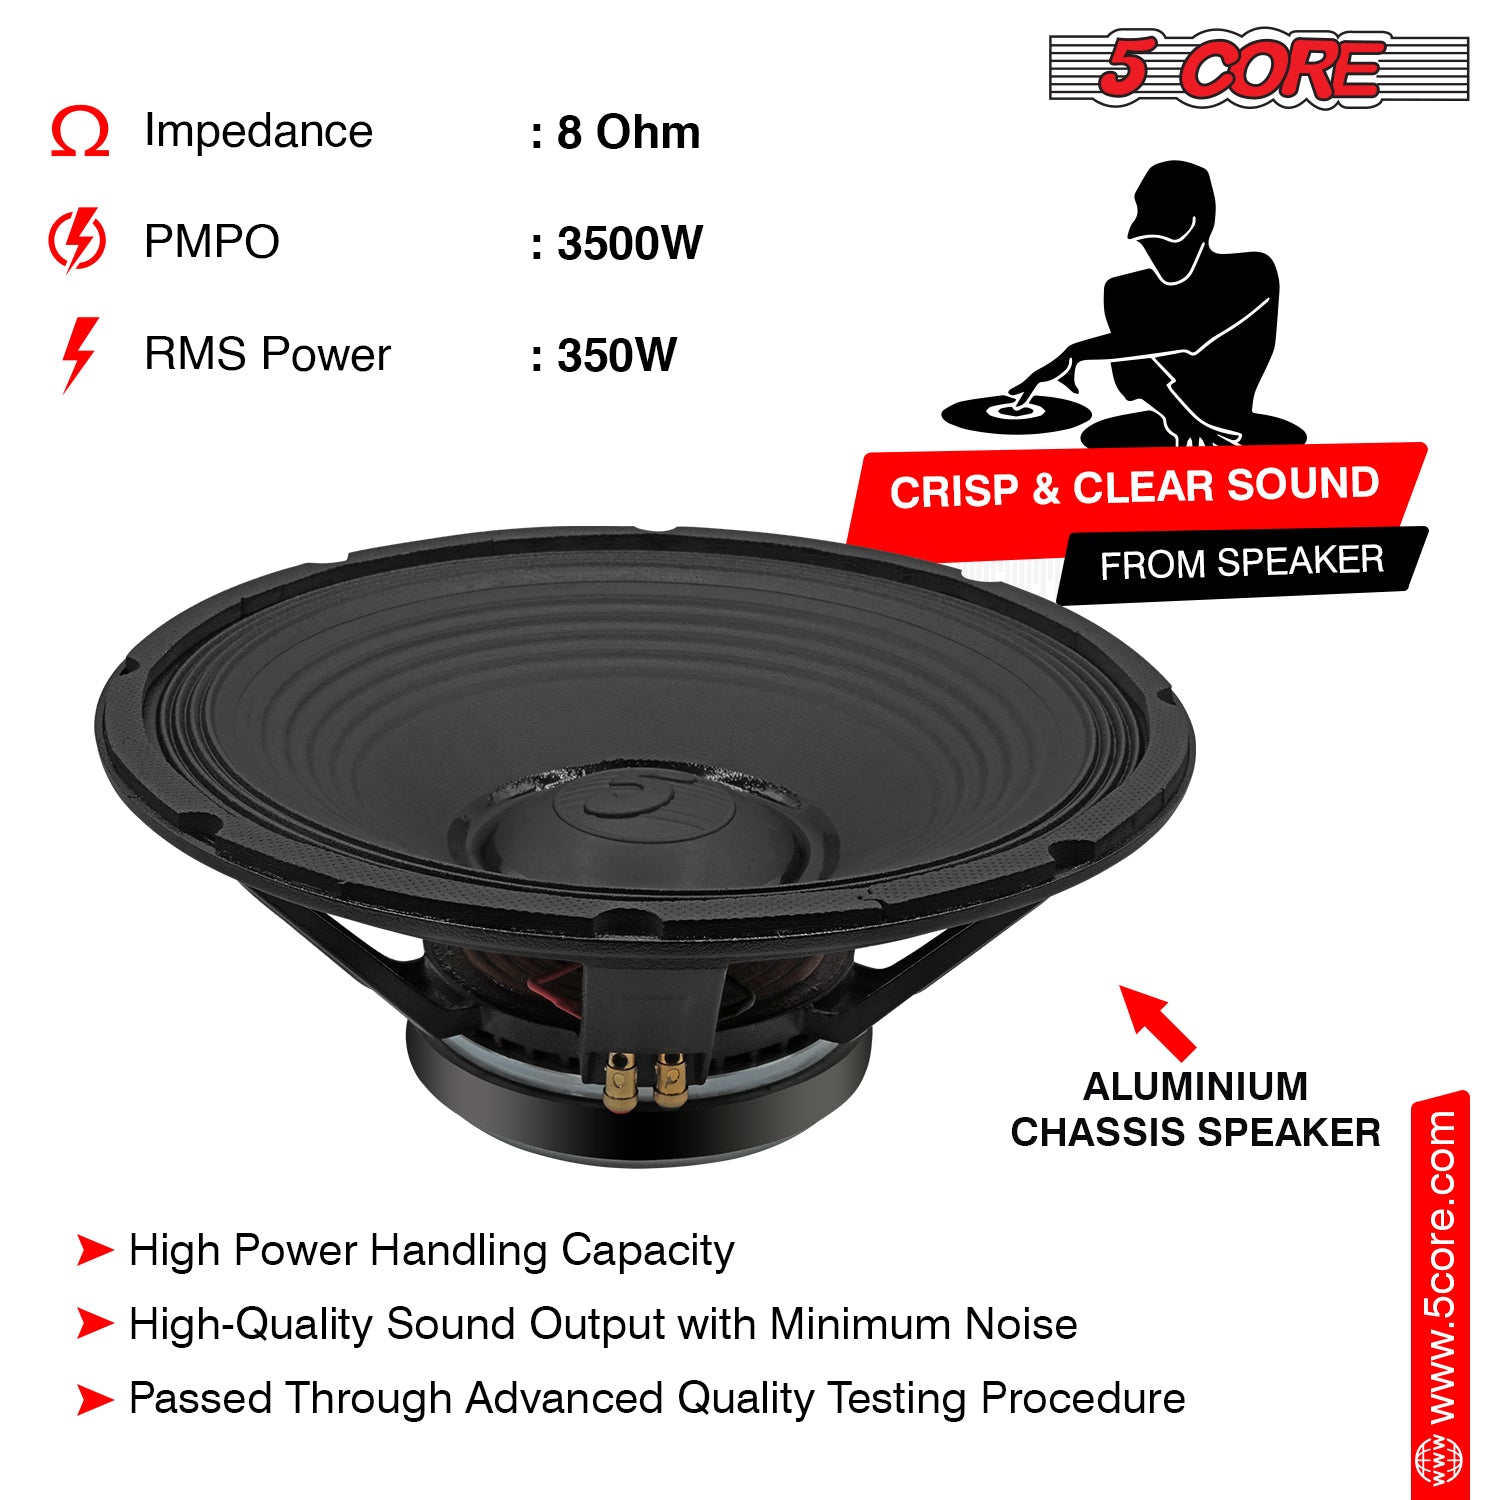 15 inch subwoofer 3500w PMPO, 350w RMS and 8 Ohm Impedance.